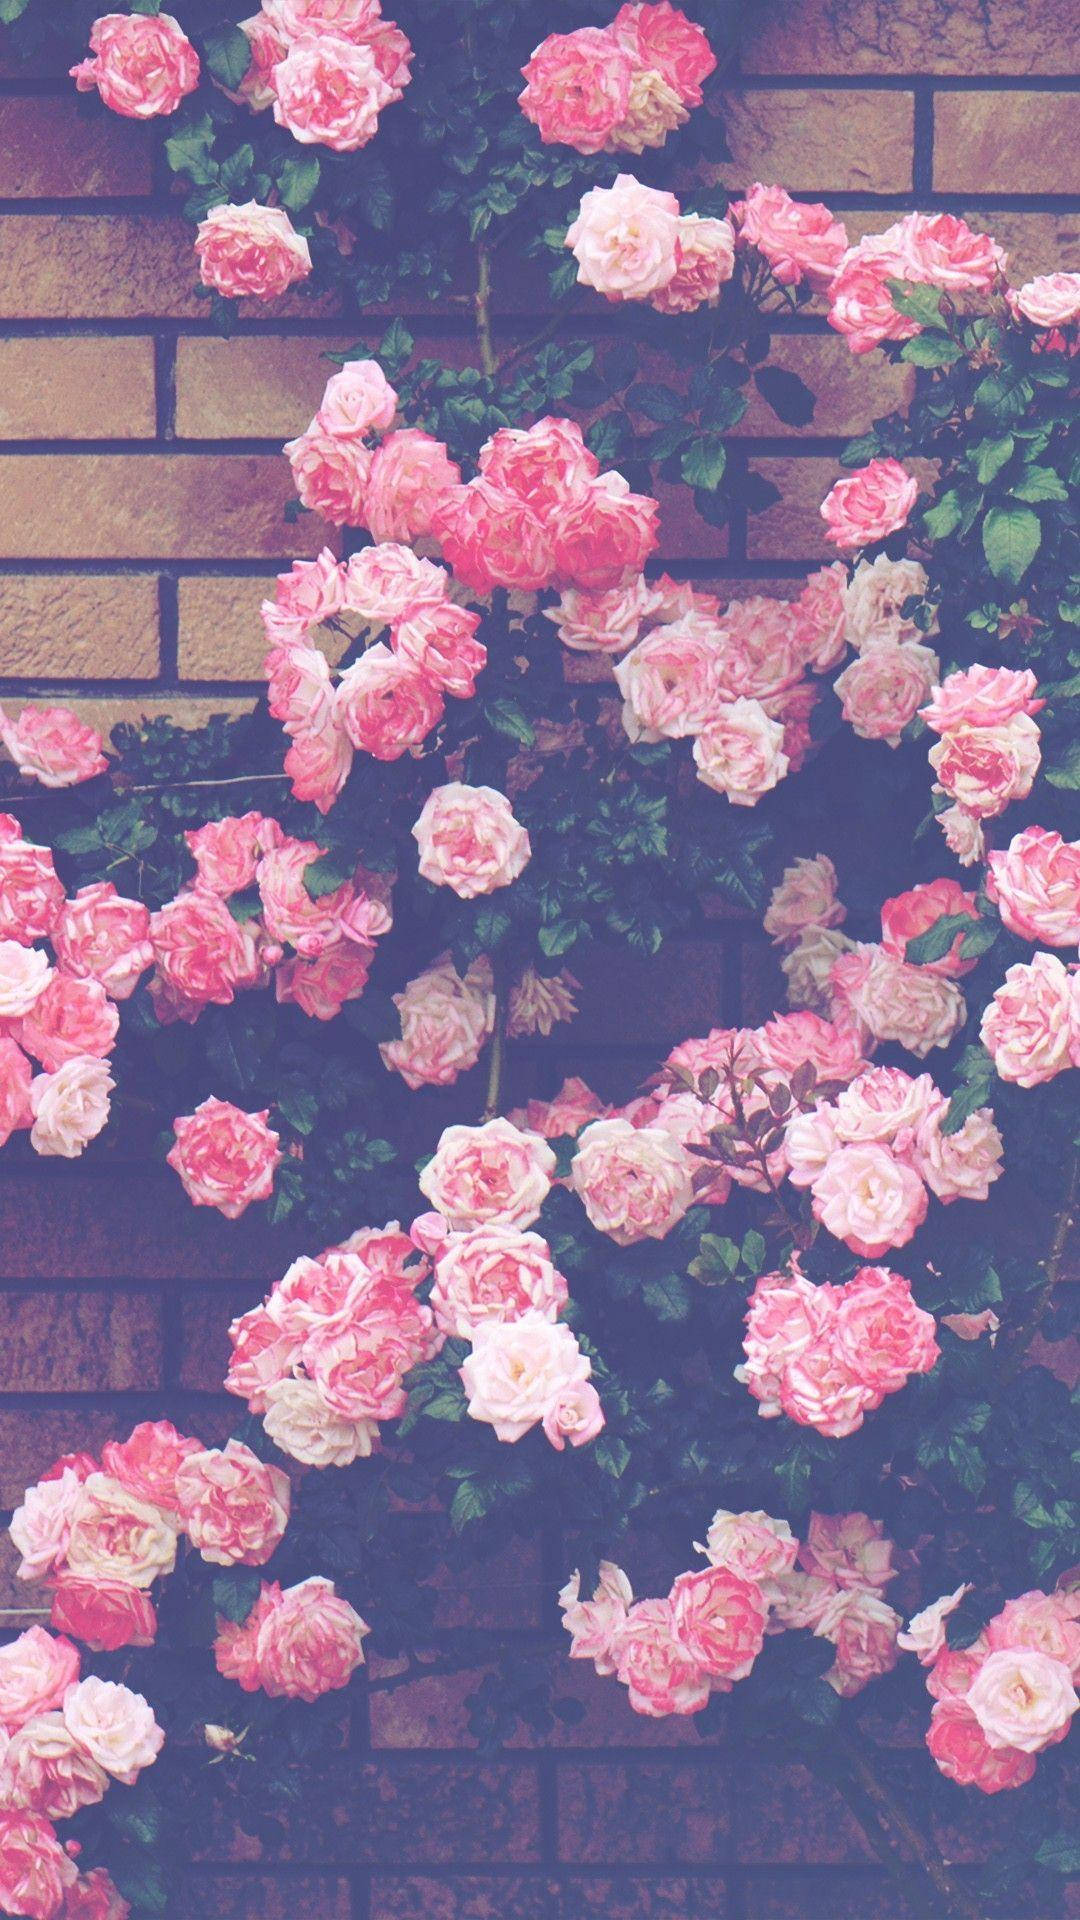 Pink Vintage Aesthetic Roses On A Wall Wallpaper